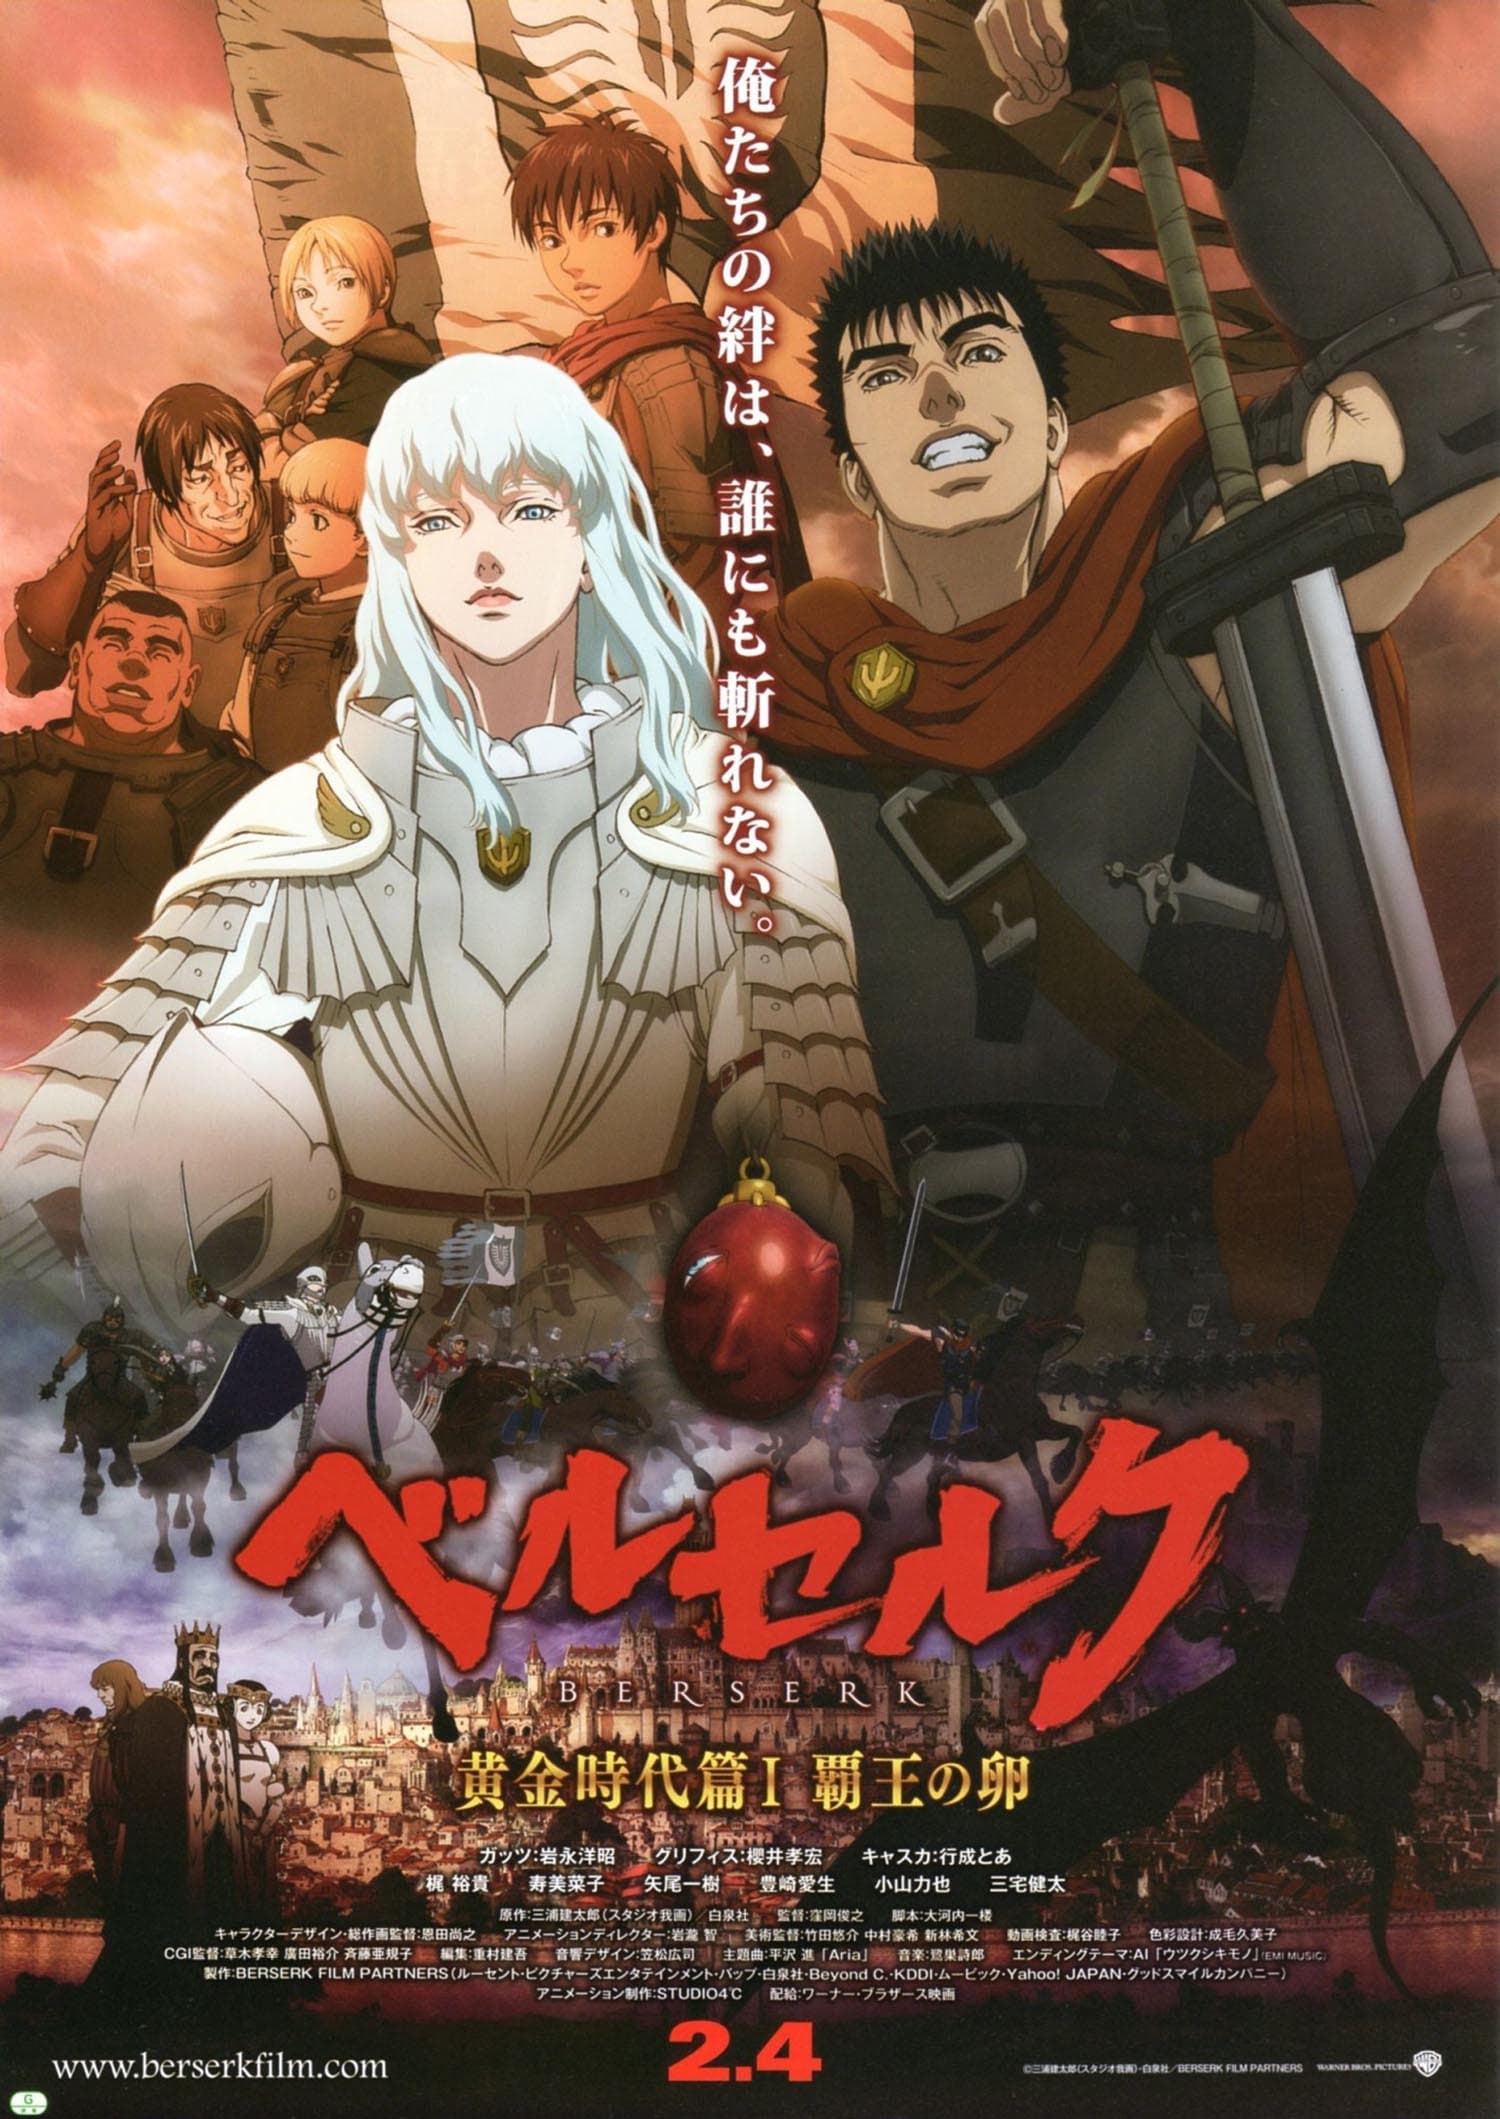 Berserk: The Golden Age Arc I - The Egg of the King (Berserk: The Golden Age Arc I - The Egg of the King) [2012]